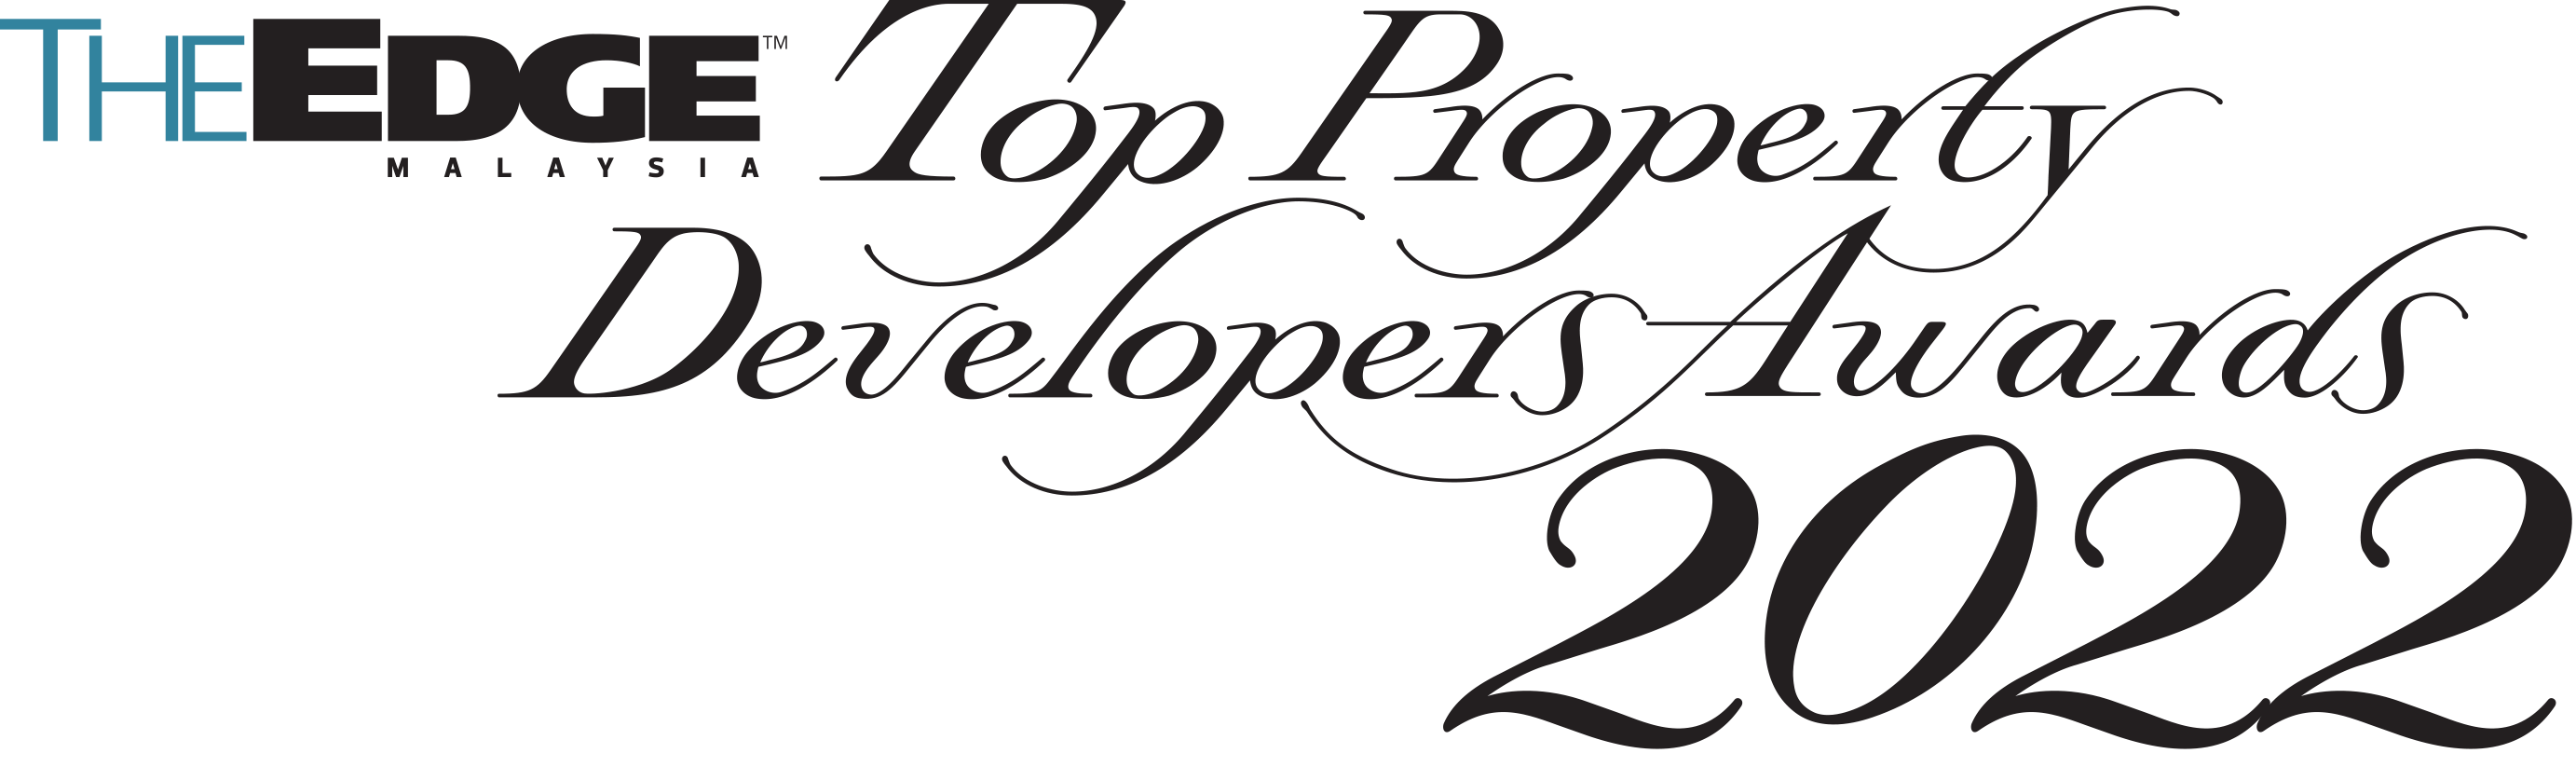 The Edge Top Property Developers Award